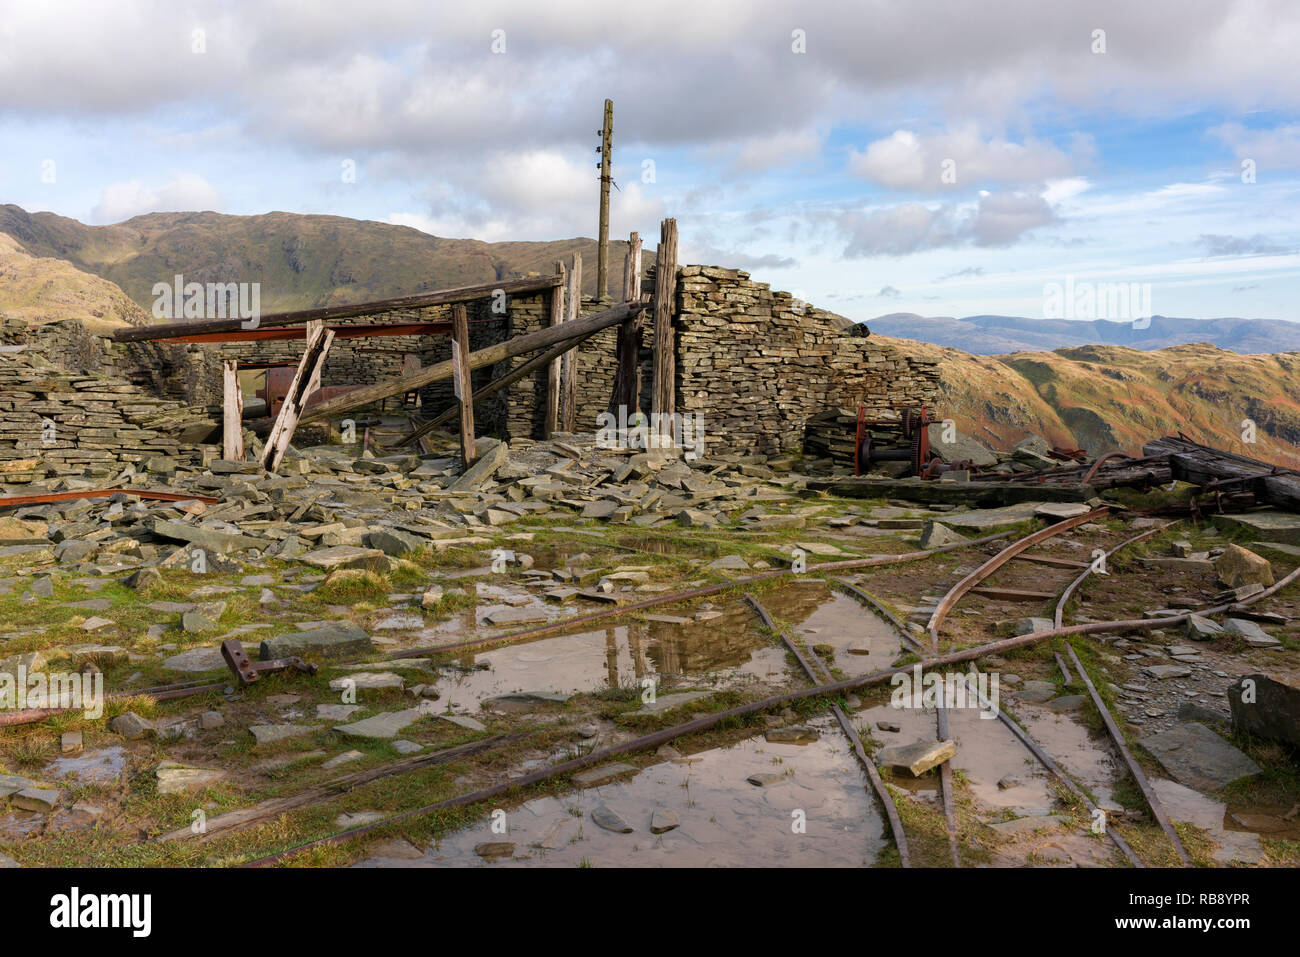 Derelict mine workings at Saddlestone Quarry on the flank of The Old Man of Coniston in the Lake District National Park, Cumbria, England. Stock Photo